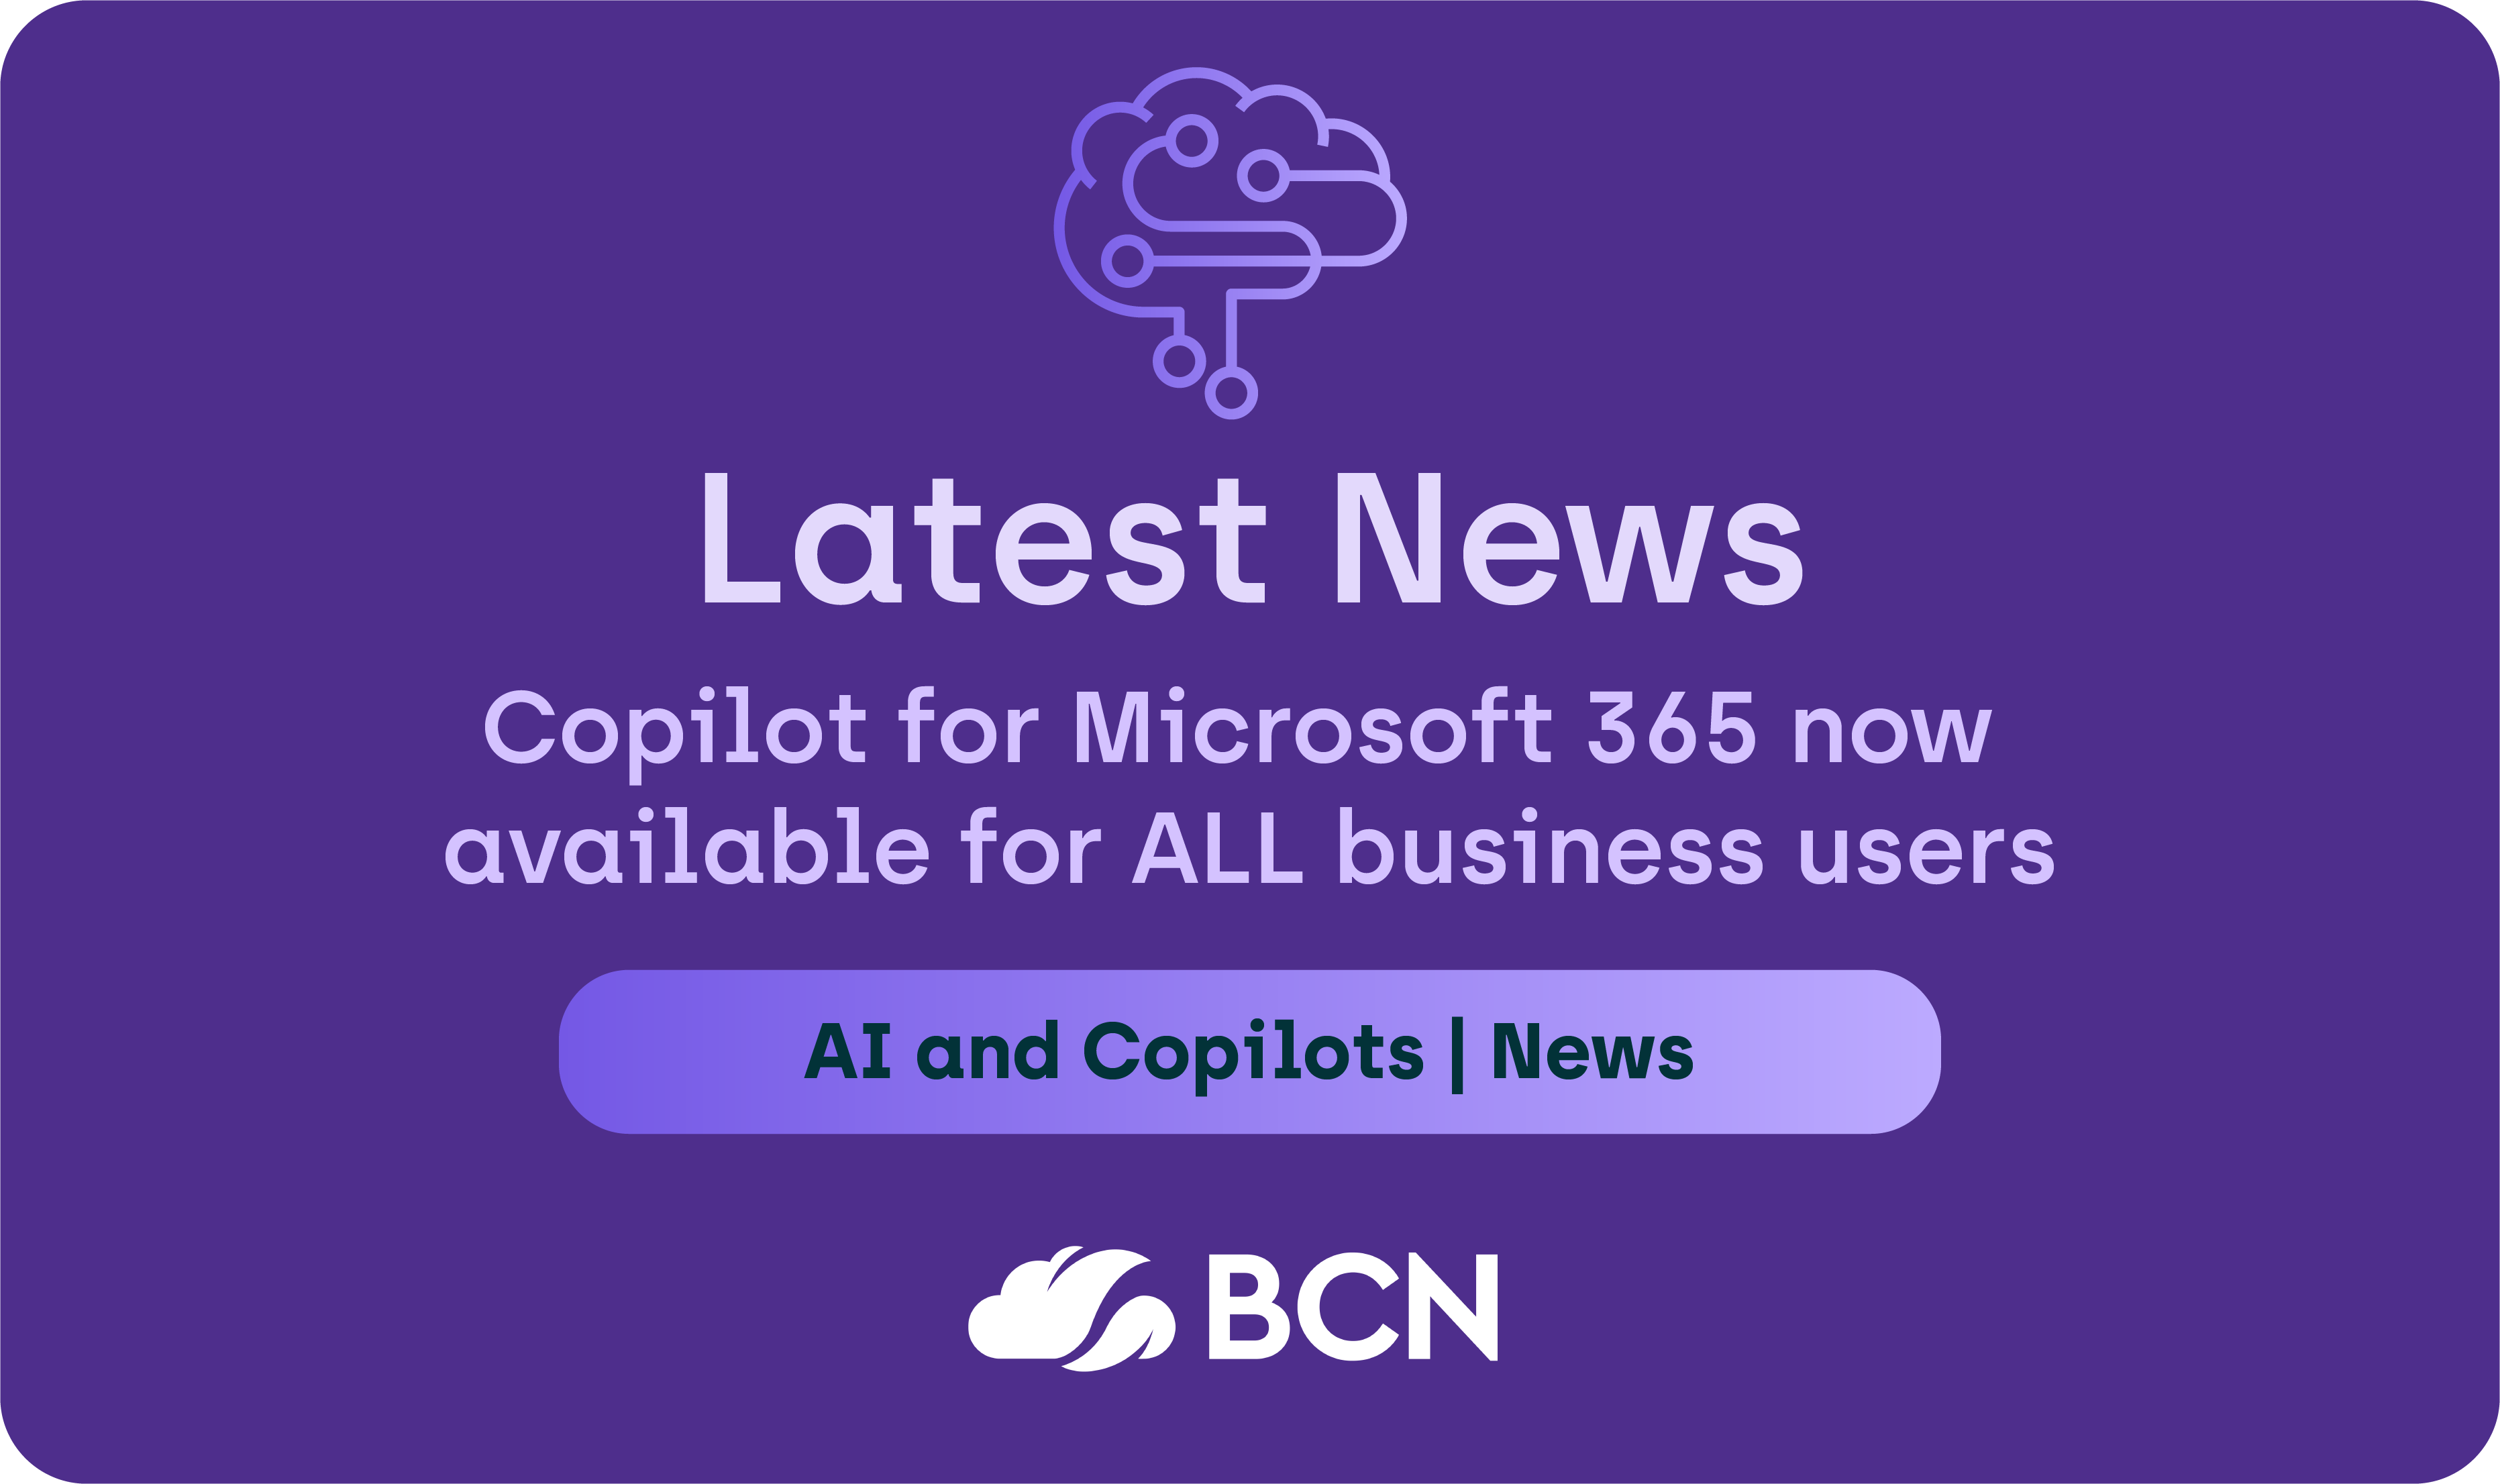 Copilot for Microsoft 365 now available for ALL business users